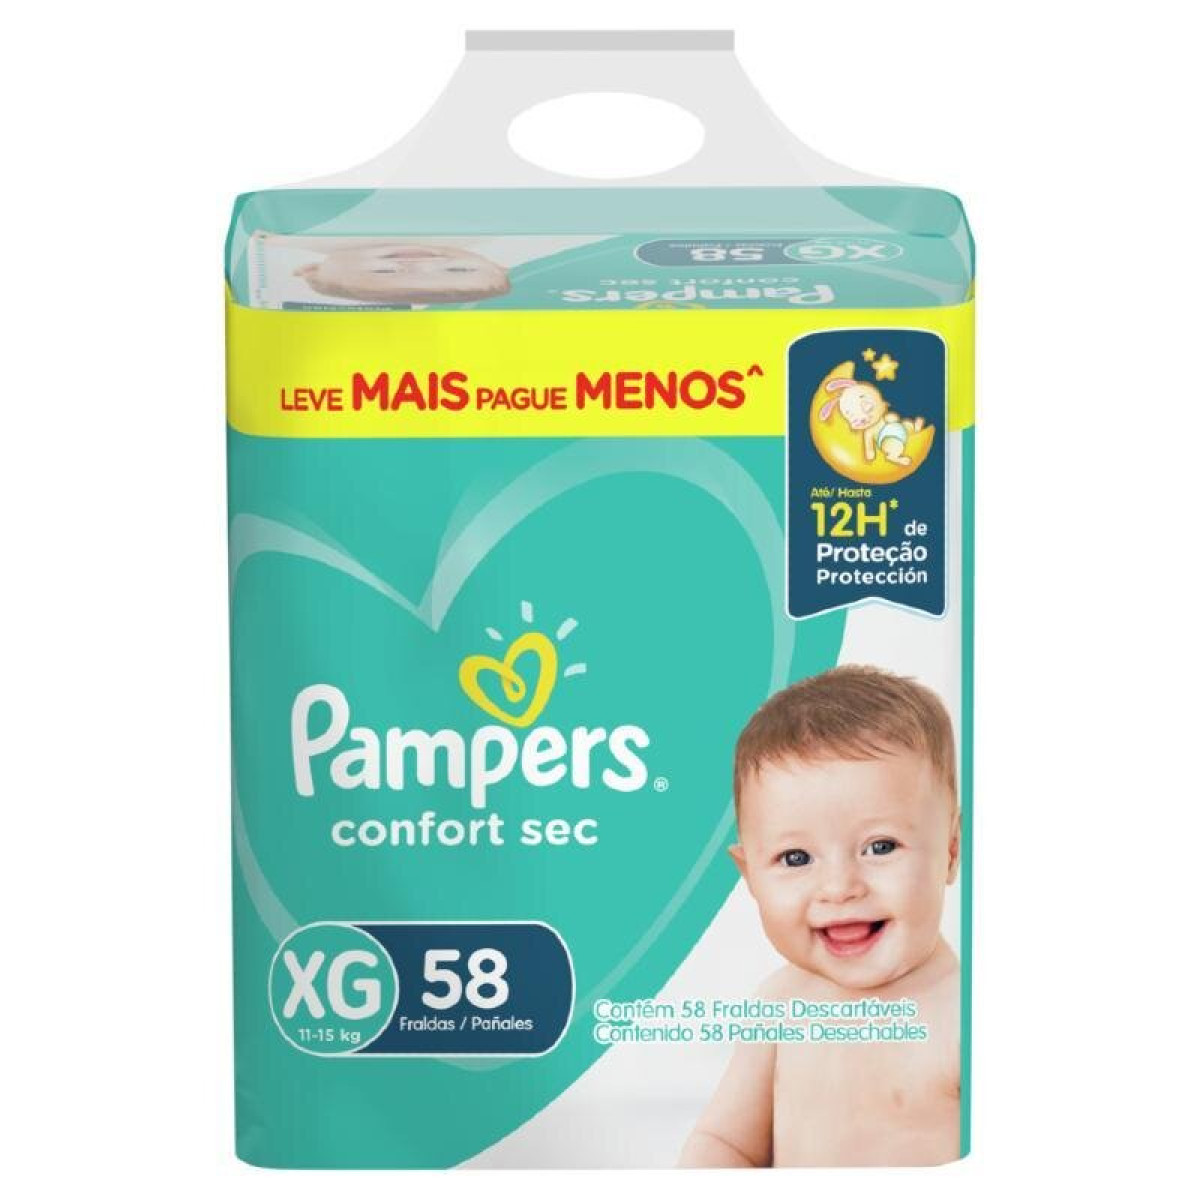 PAMPERS PANAL COMFORT XG X 58 UNID